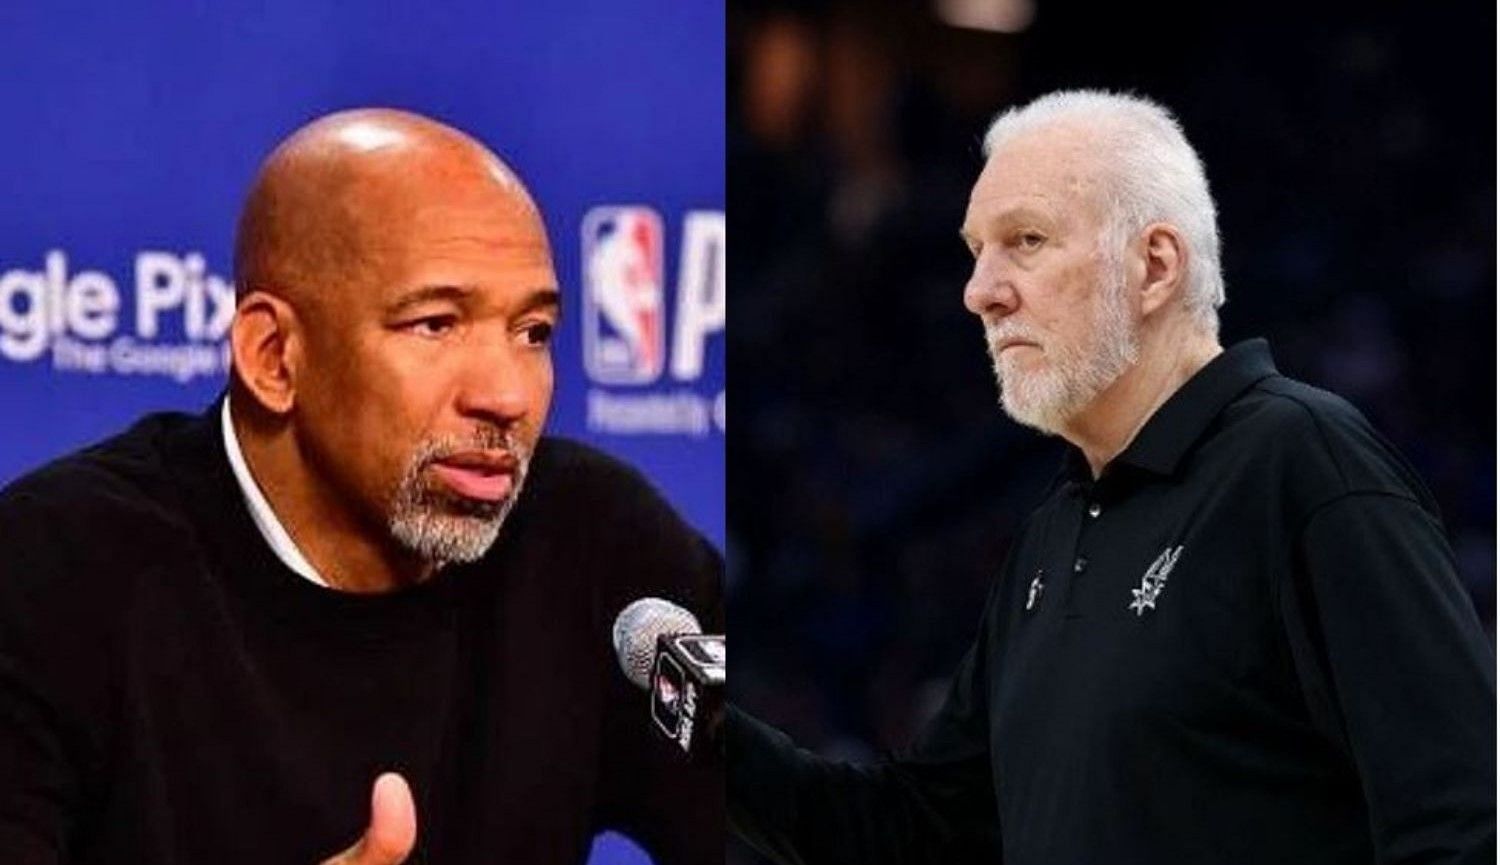 Top-paid NBA coaches Monty Williams (L) and Gregg Popovich (R) are having it rough in the ongoing season.